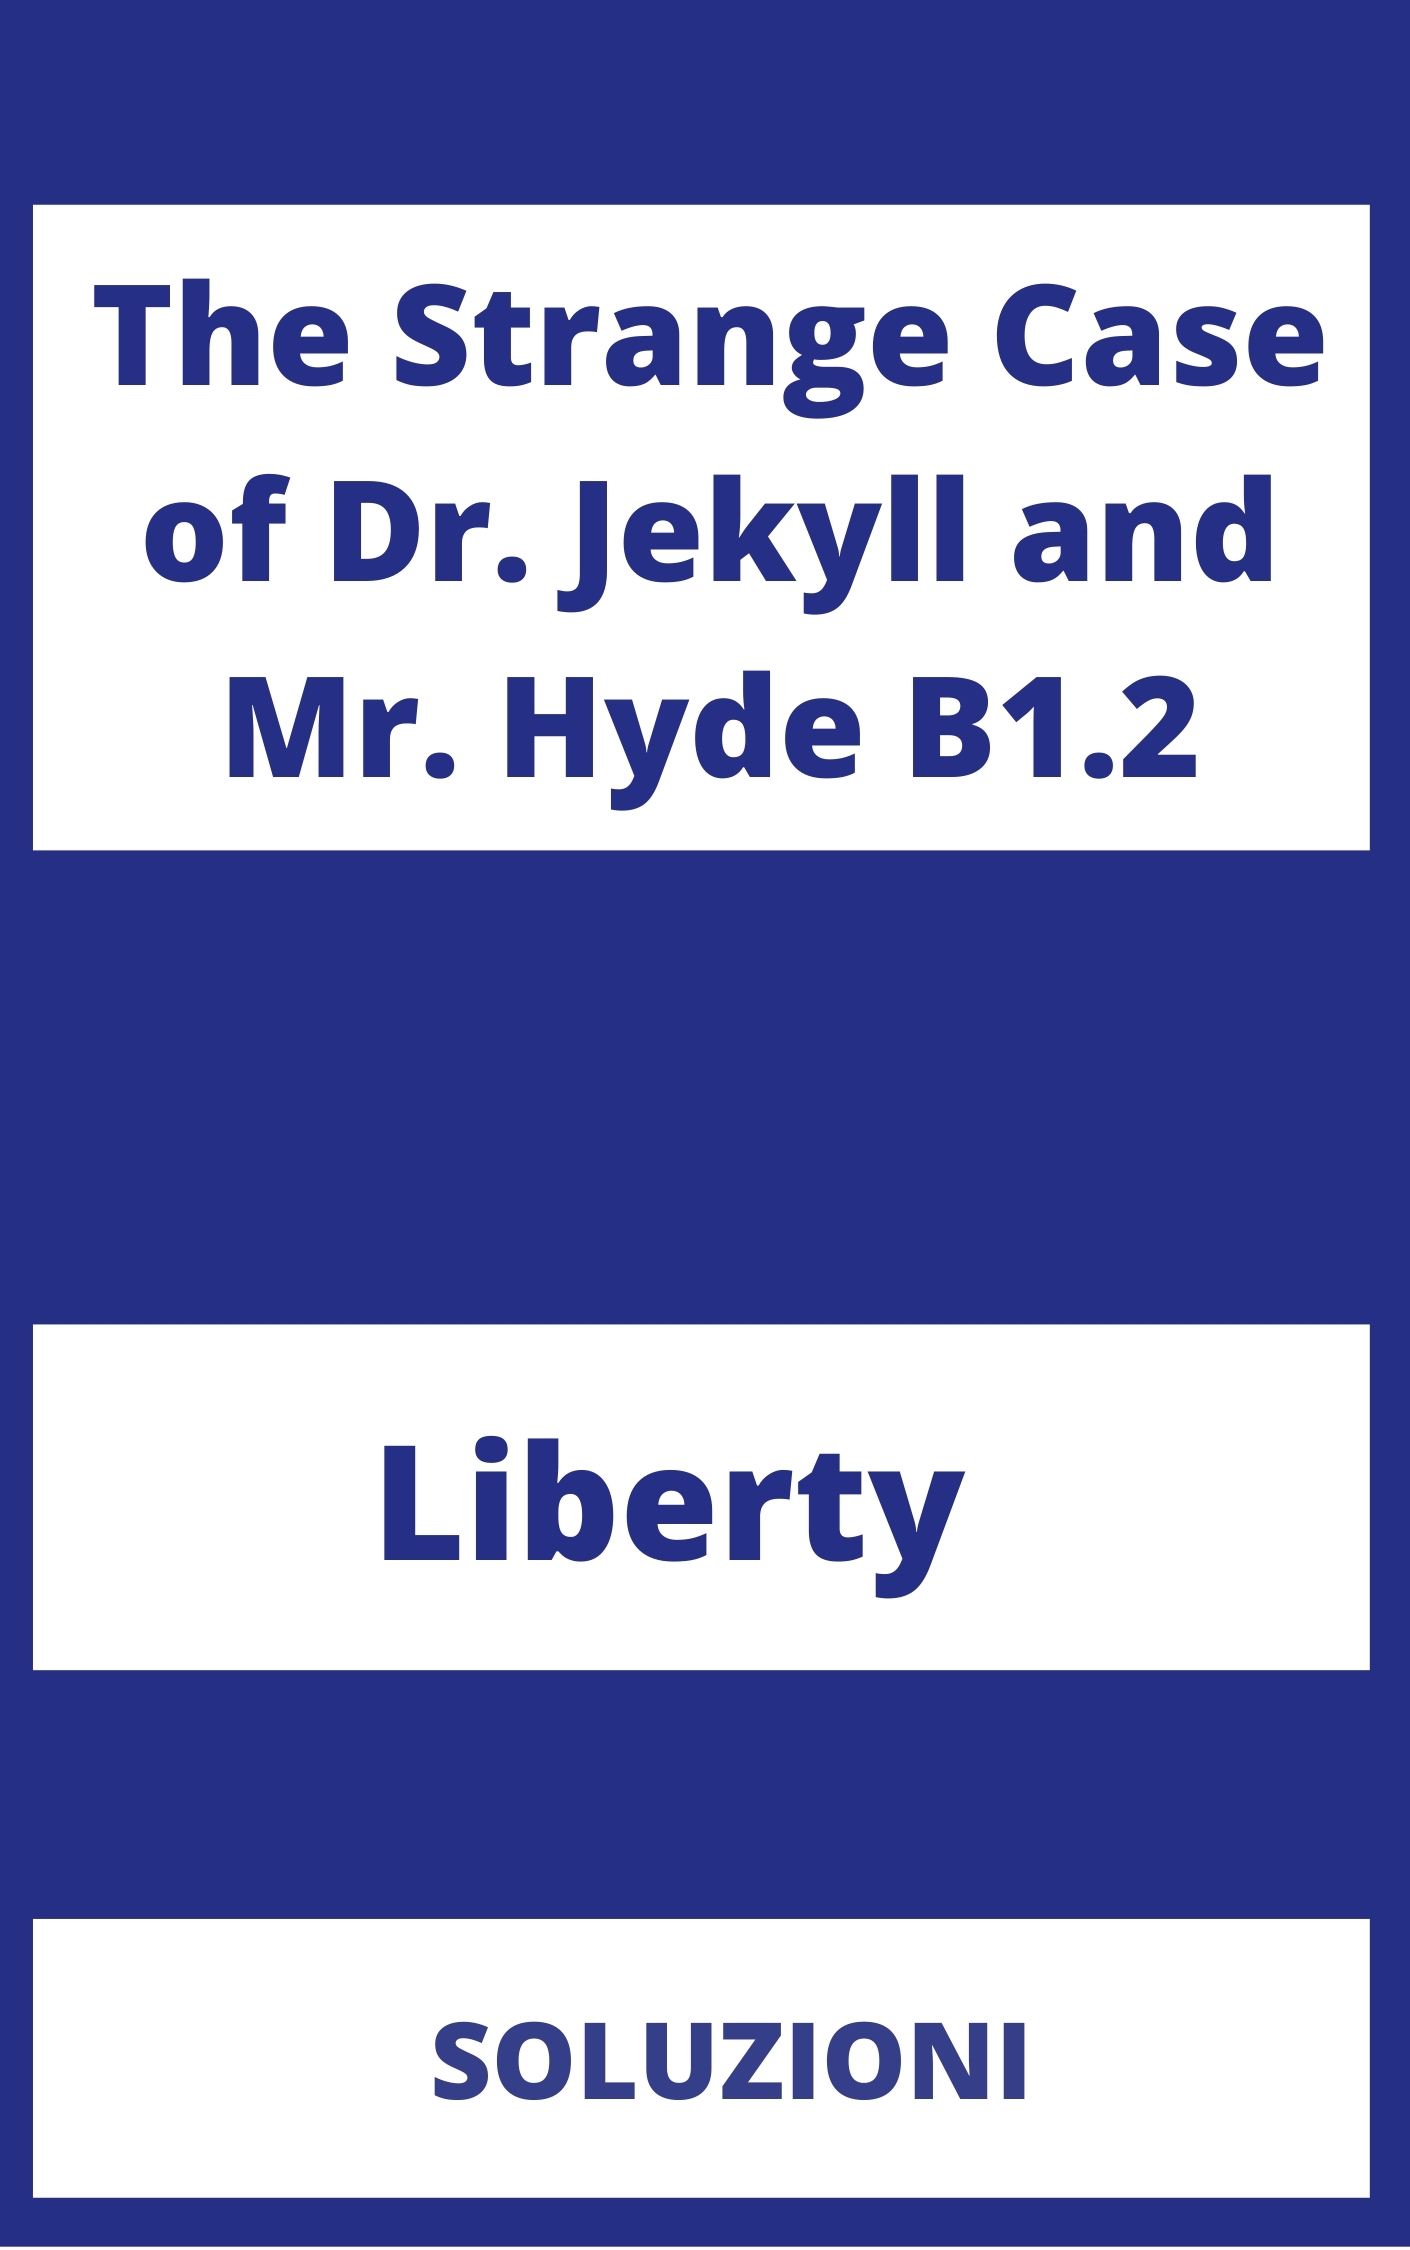 The Strange Case of Dr. Jekyll and Mr. Hyde B1.2 Soluzioni